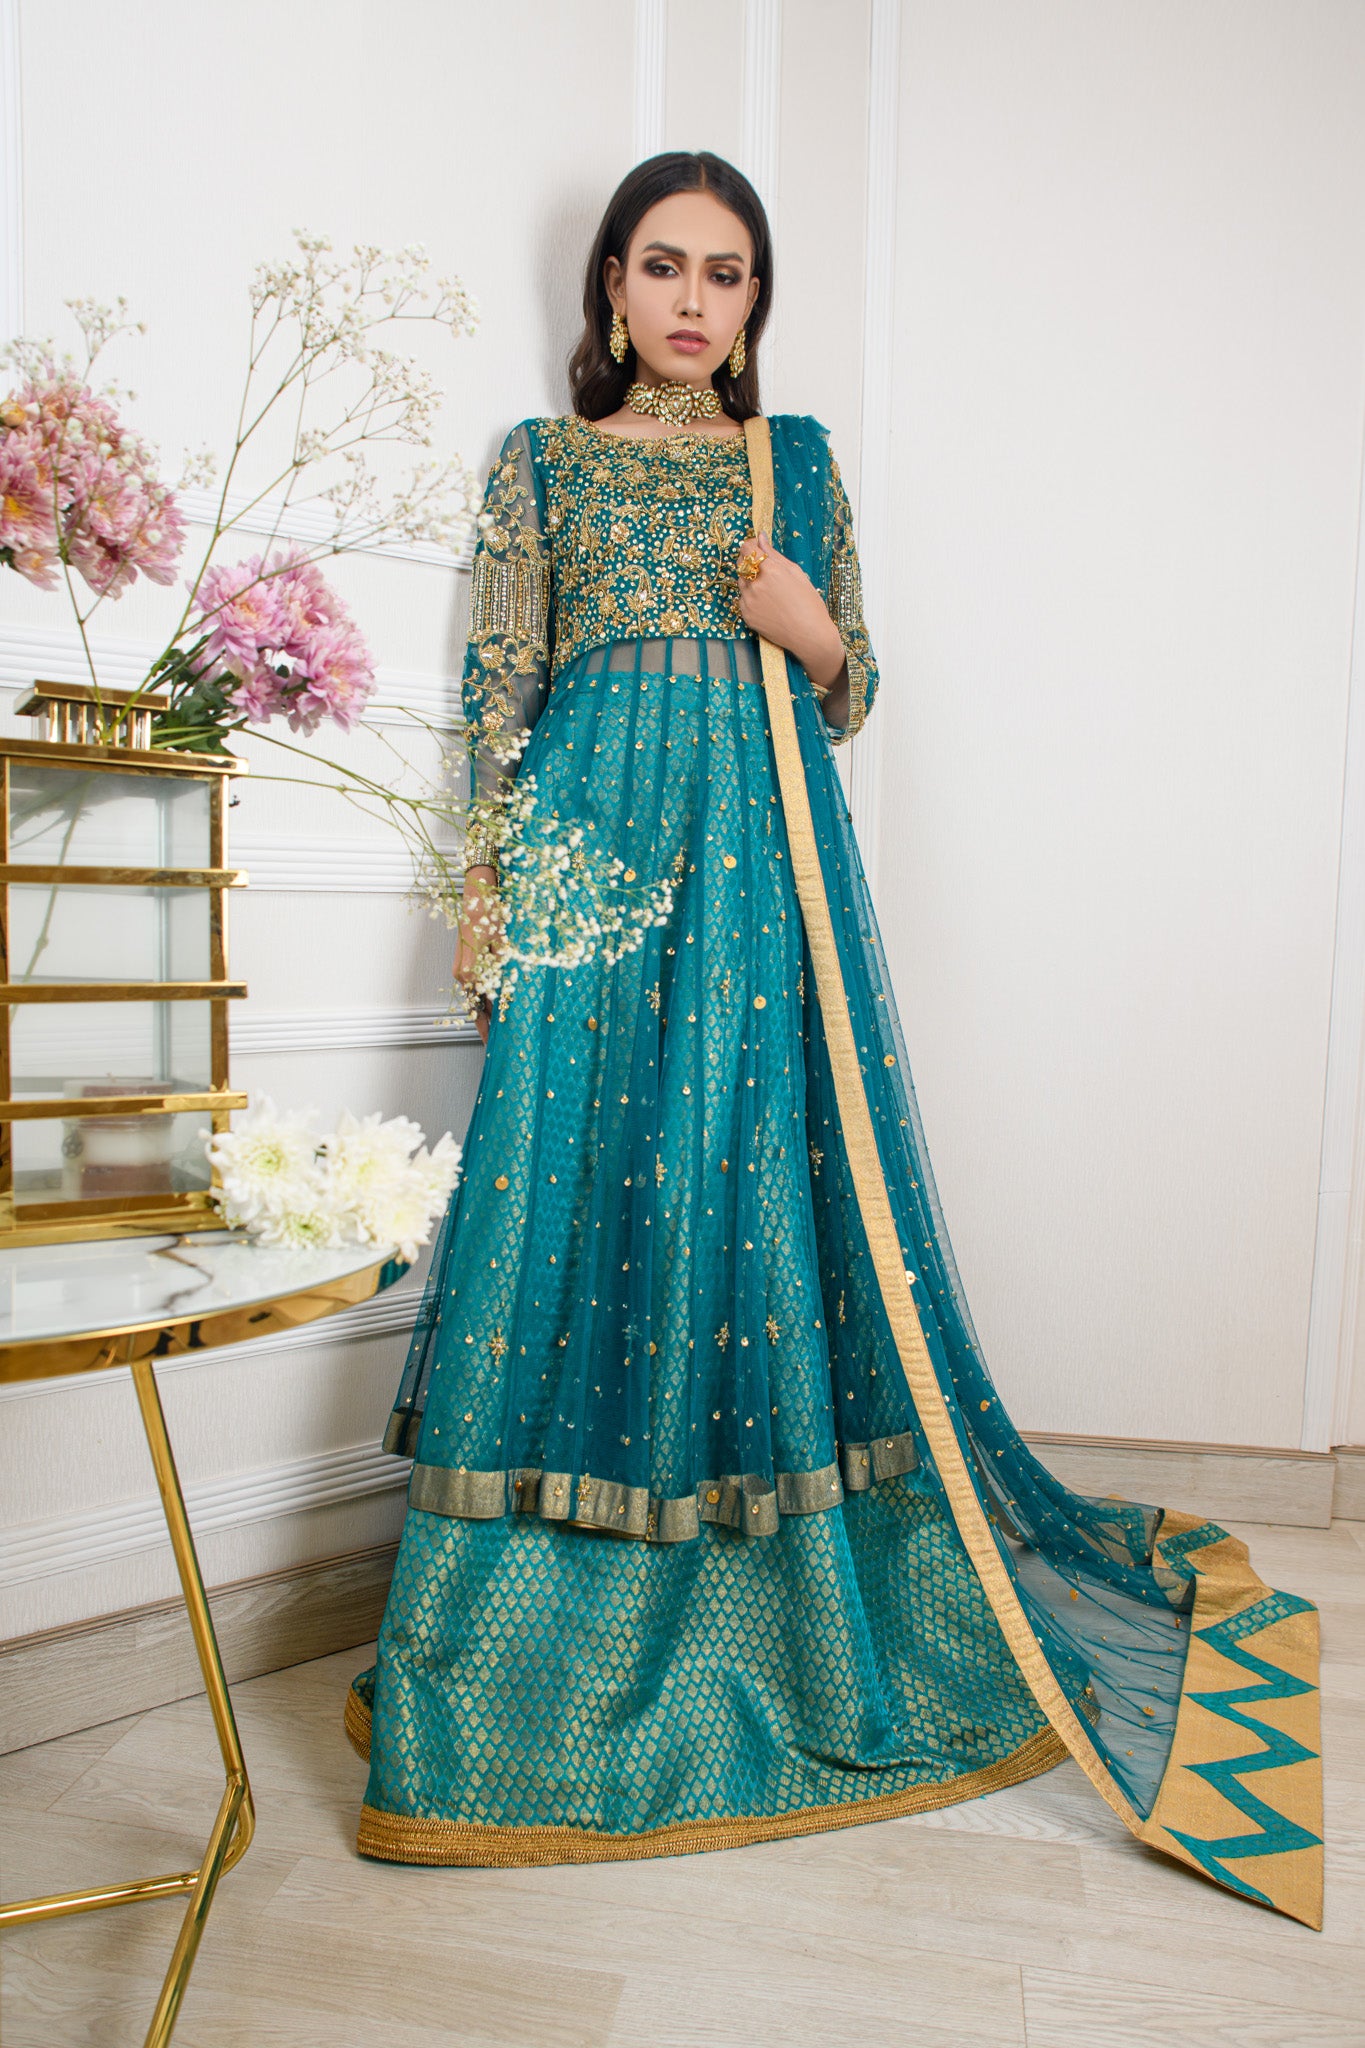 Discover the Timeless Elegance of Shireen Lakdawala's Pakistani Formal Wear Collection